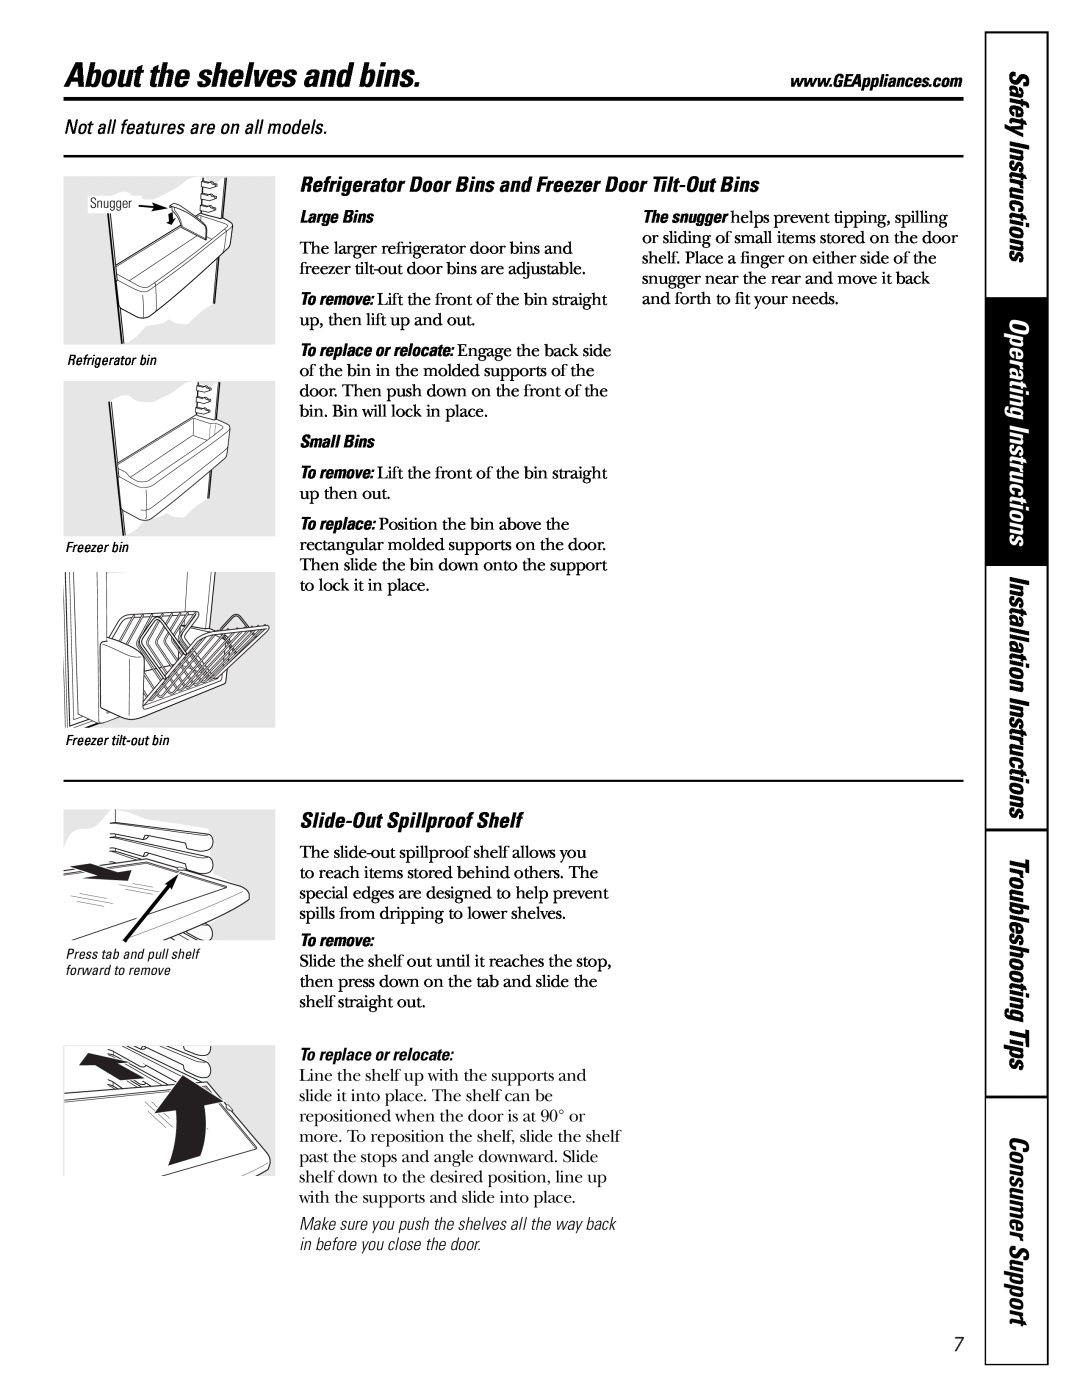 GE 25 installation instructions About the shelves and bins, Safety, Refrigerator Door Bins and Freezer Door Tilt-Out Bins 